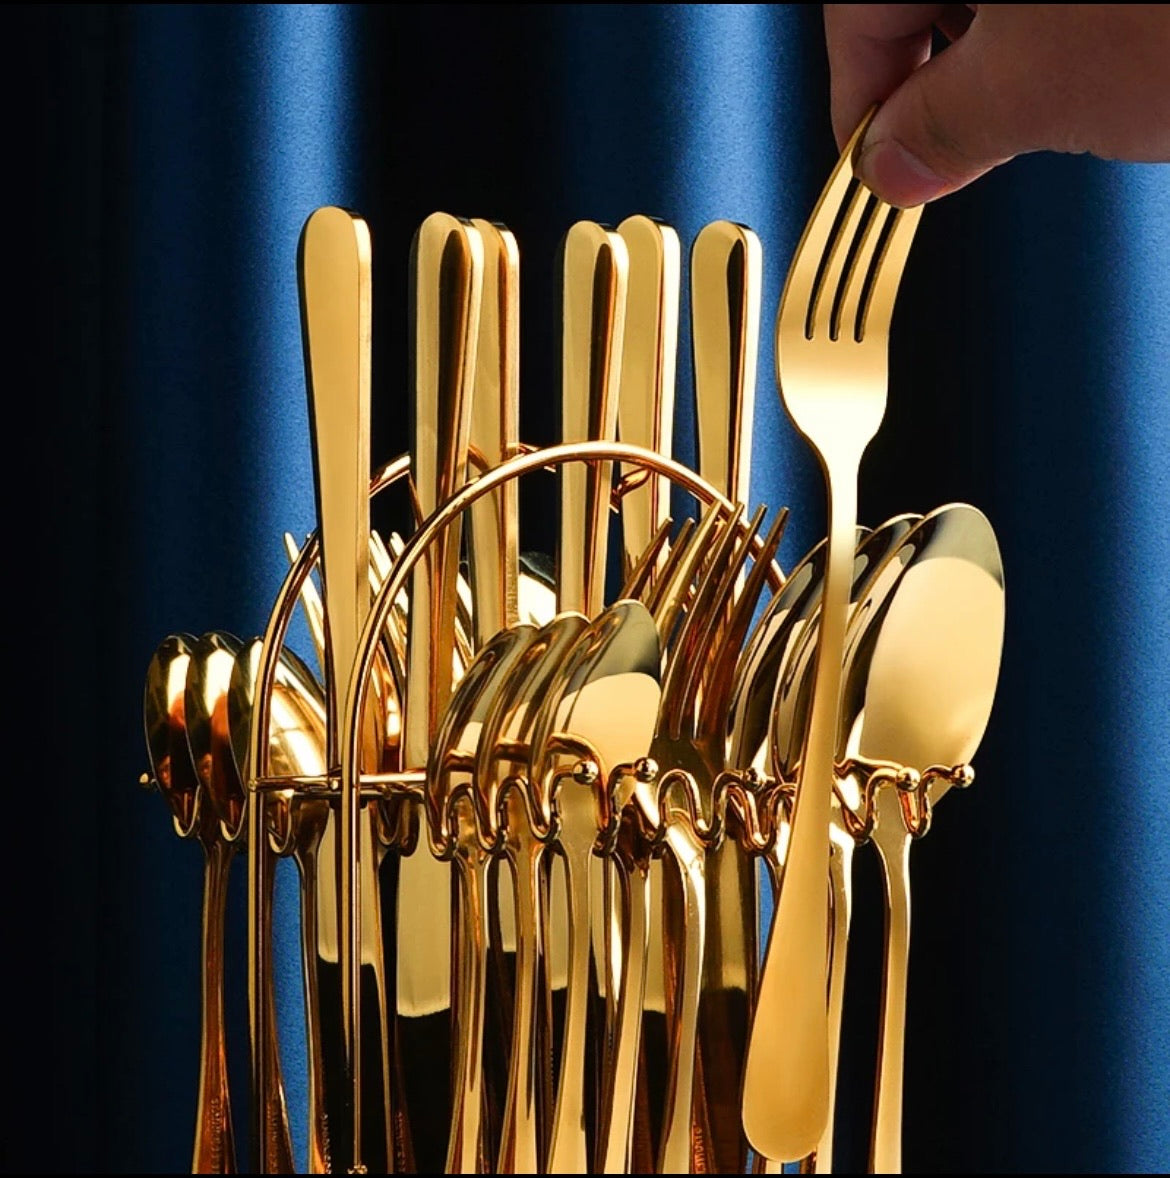 Hanging Gold Premium Stainless Steel Cutlery Set